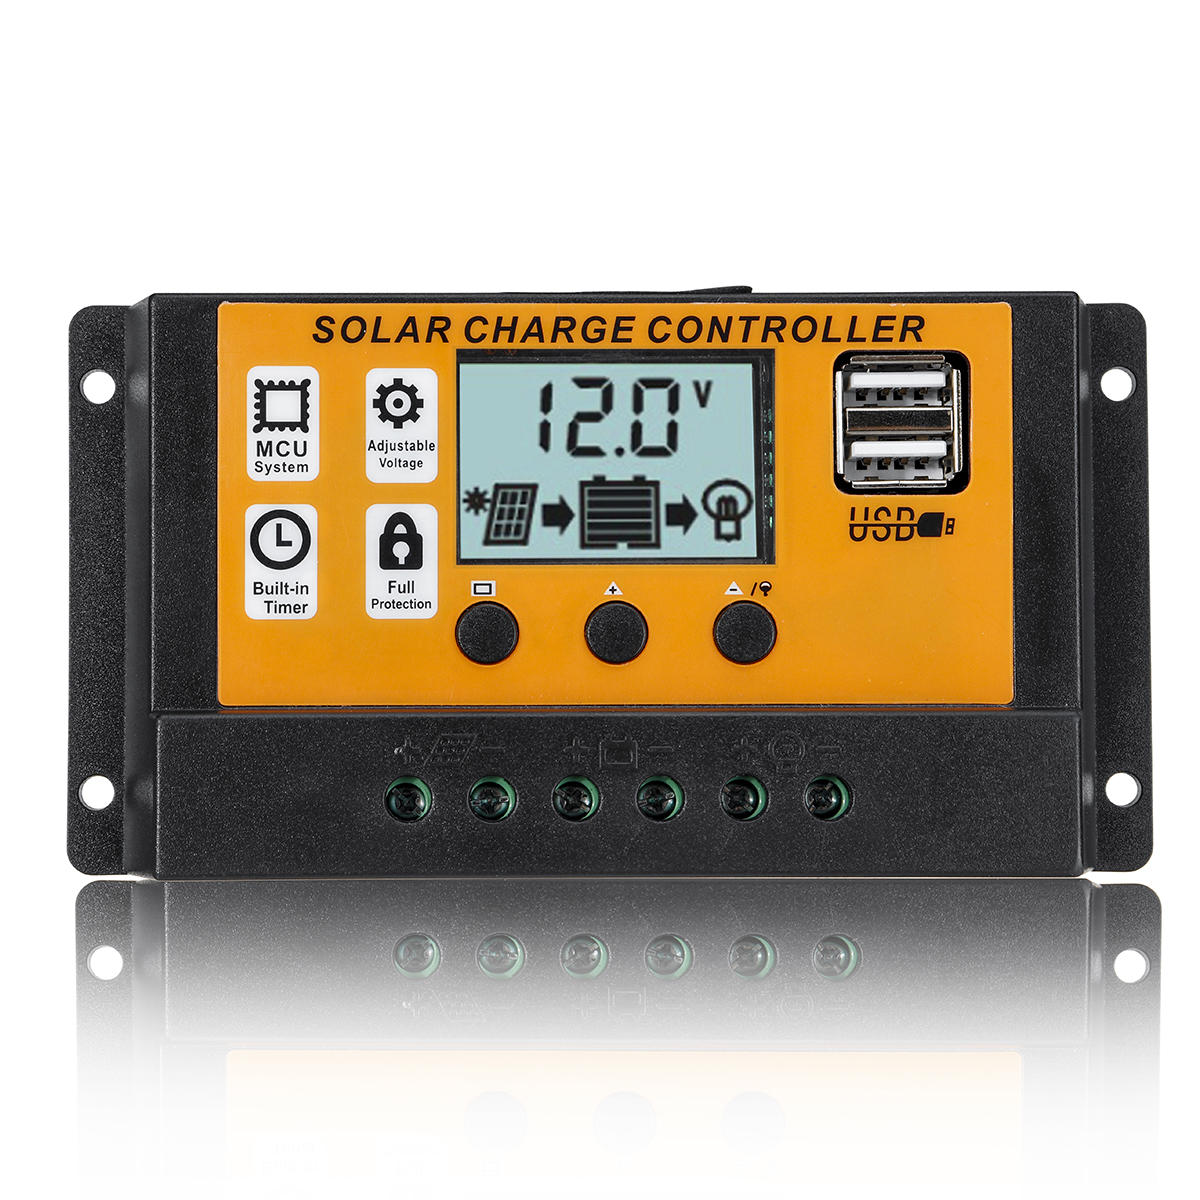 LCD Display 12V/24V Auto Solar Charge Controller PWM Controller Dual